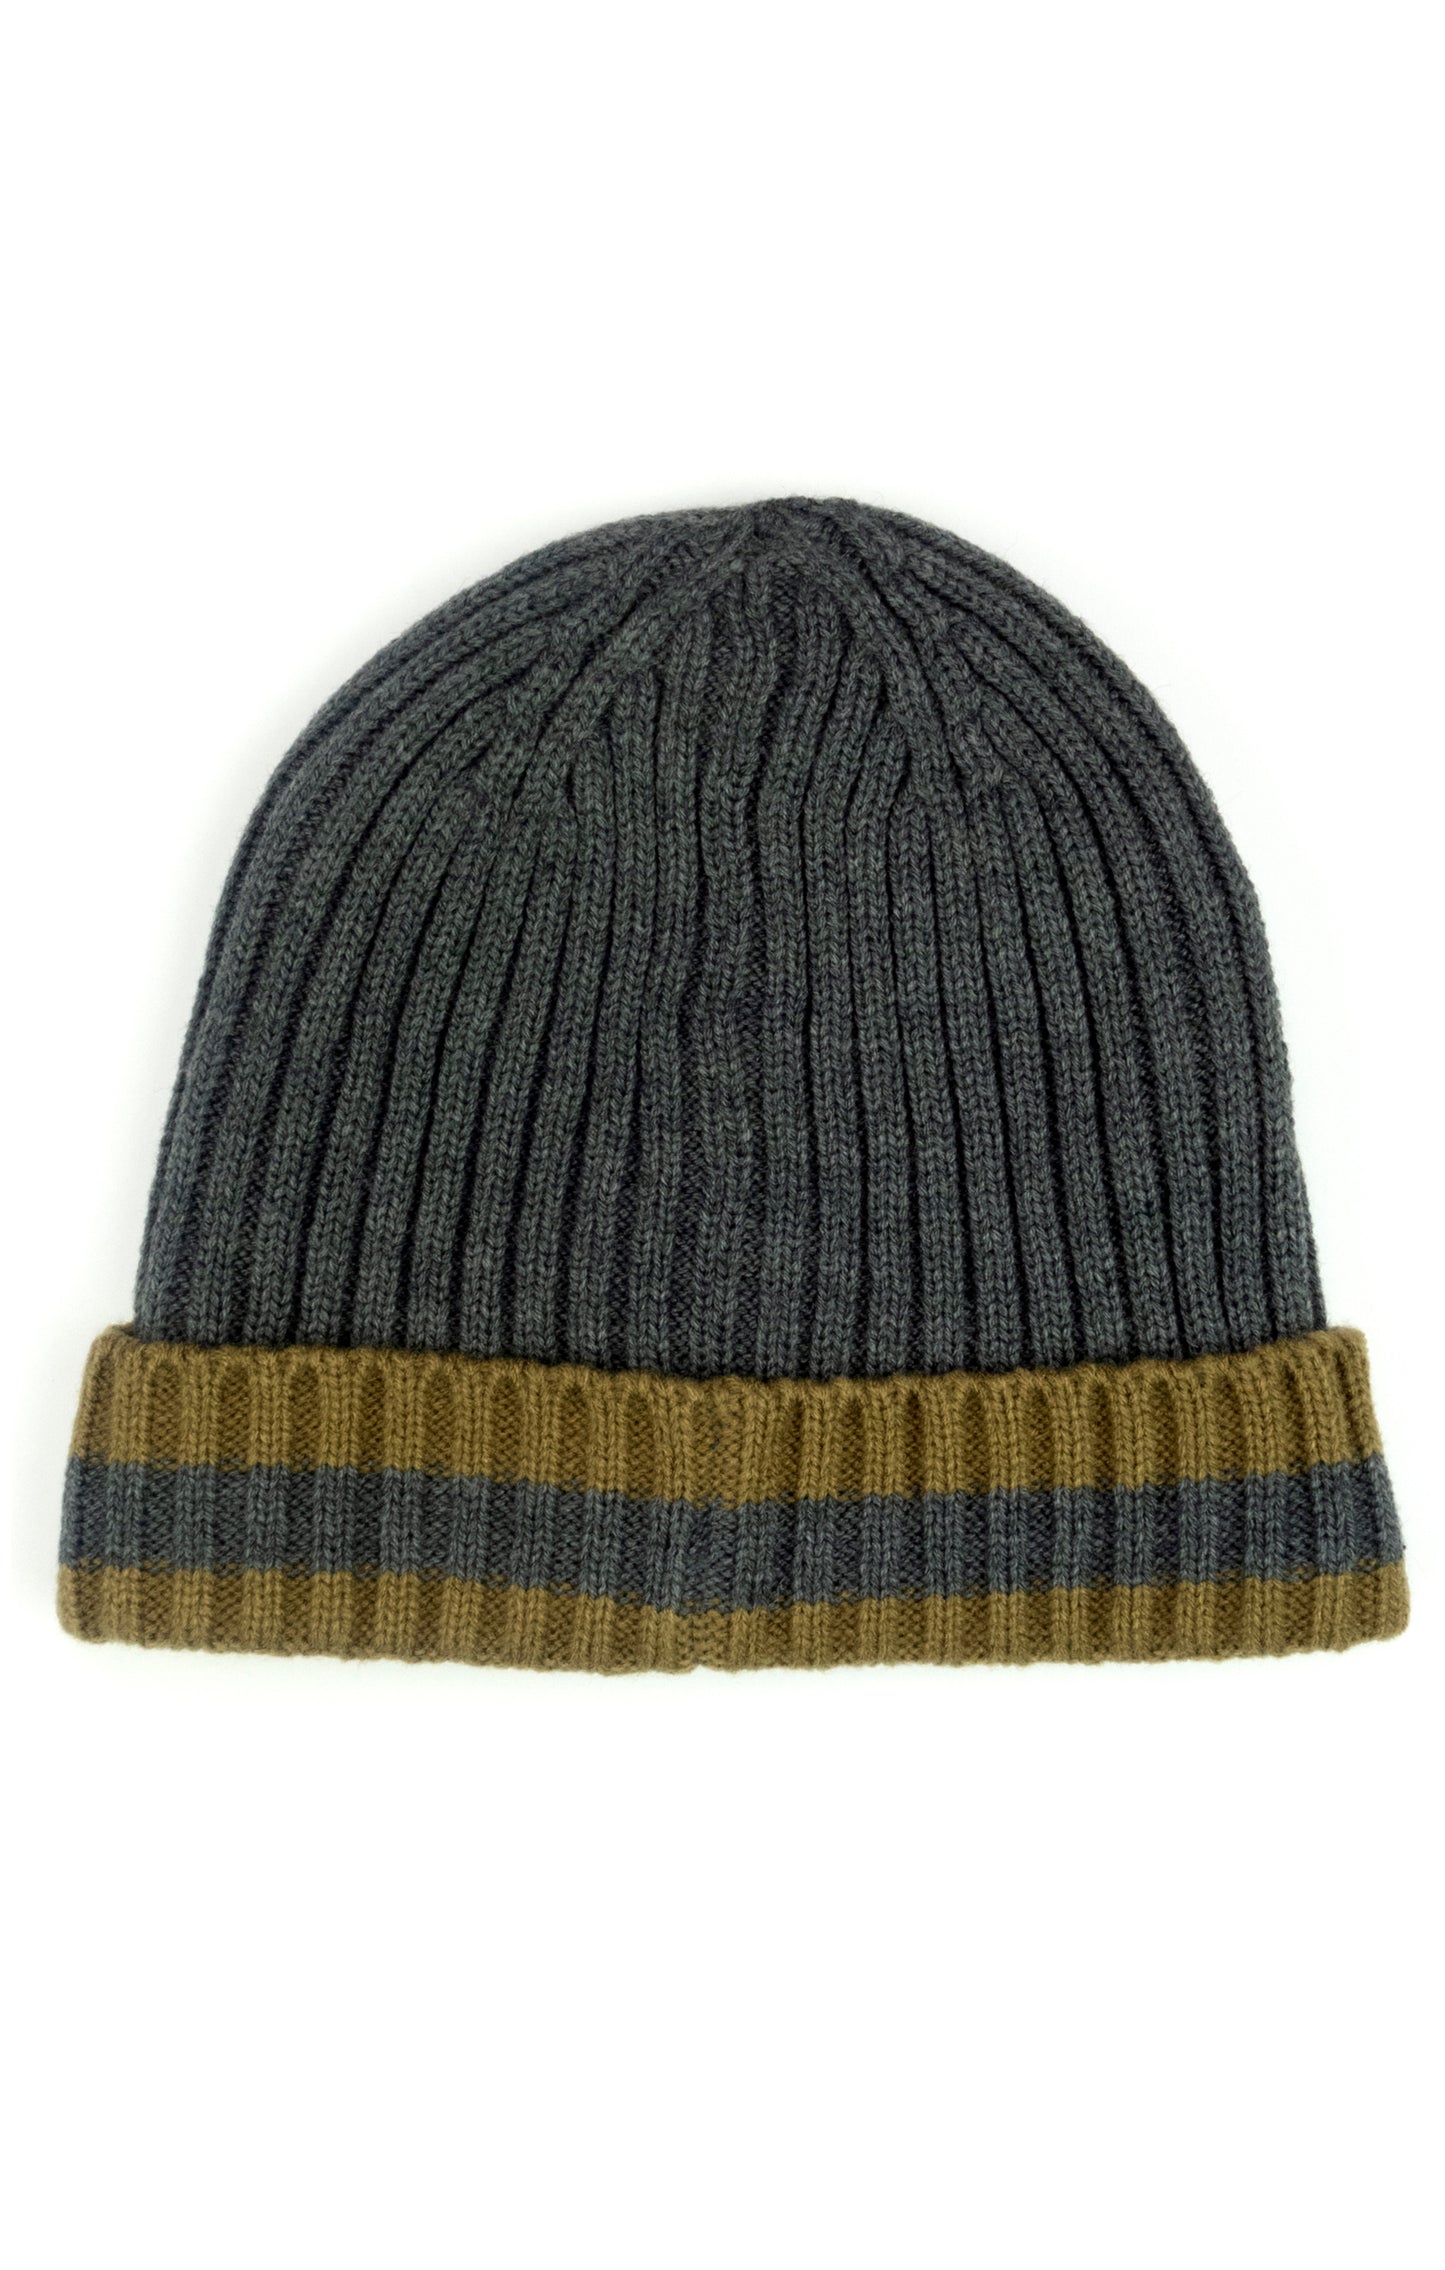 Appaman knit ribbed beanie in grey and yellow